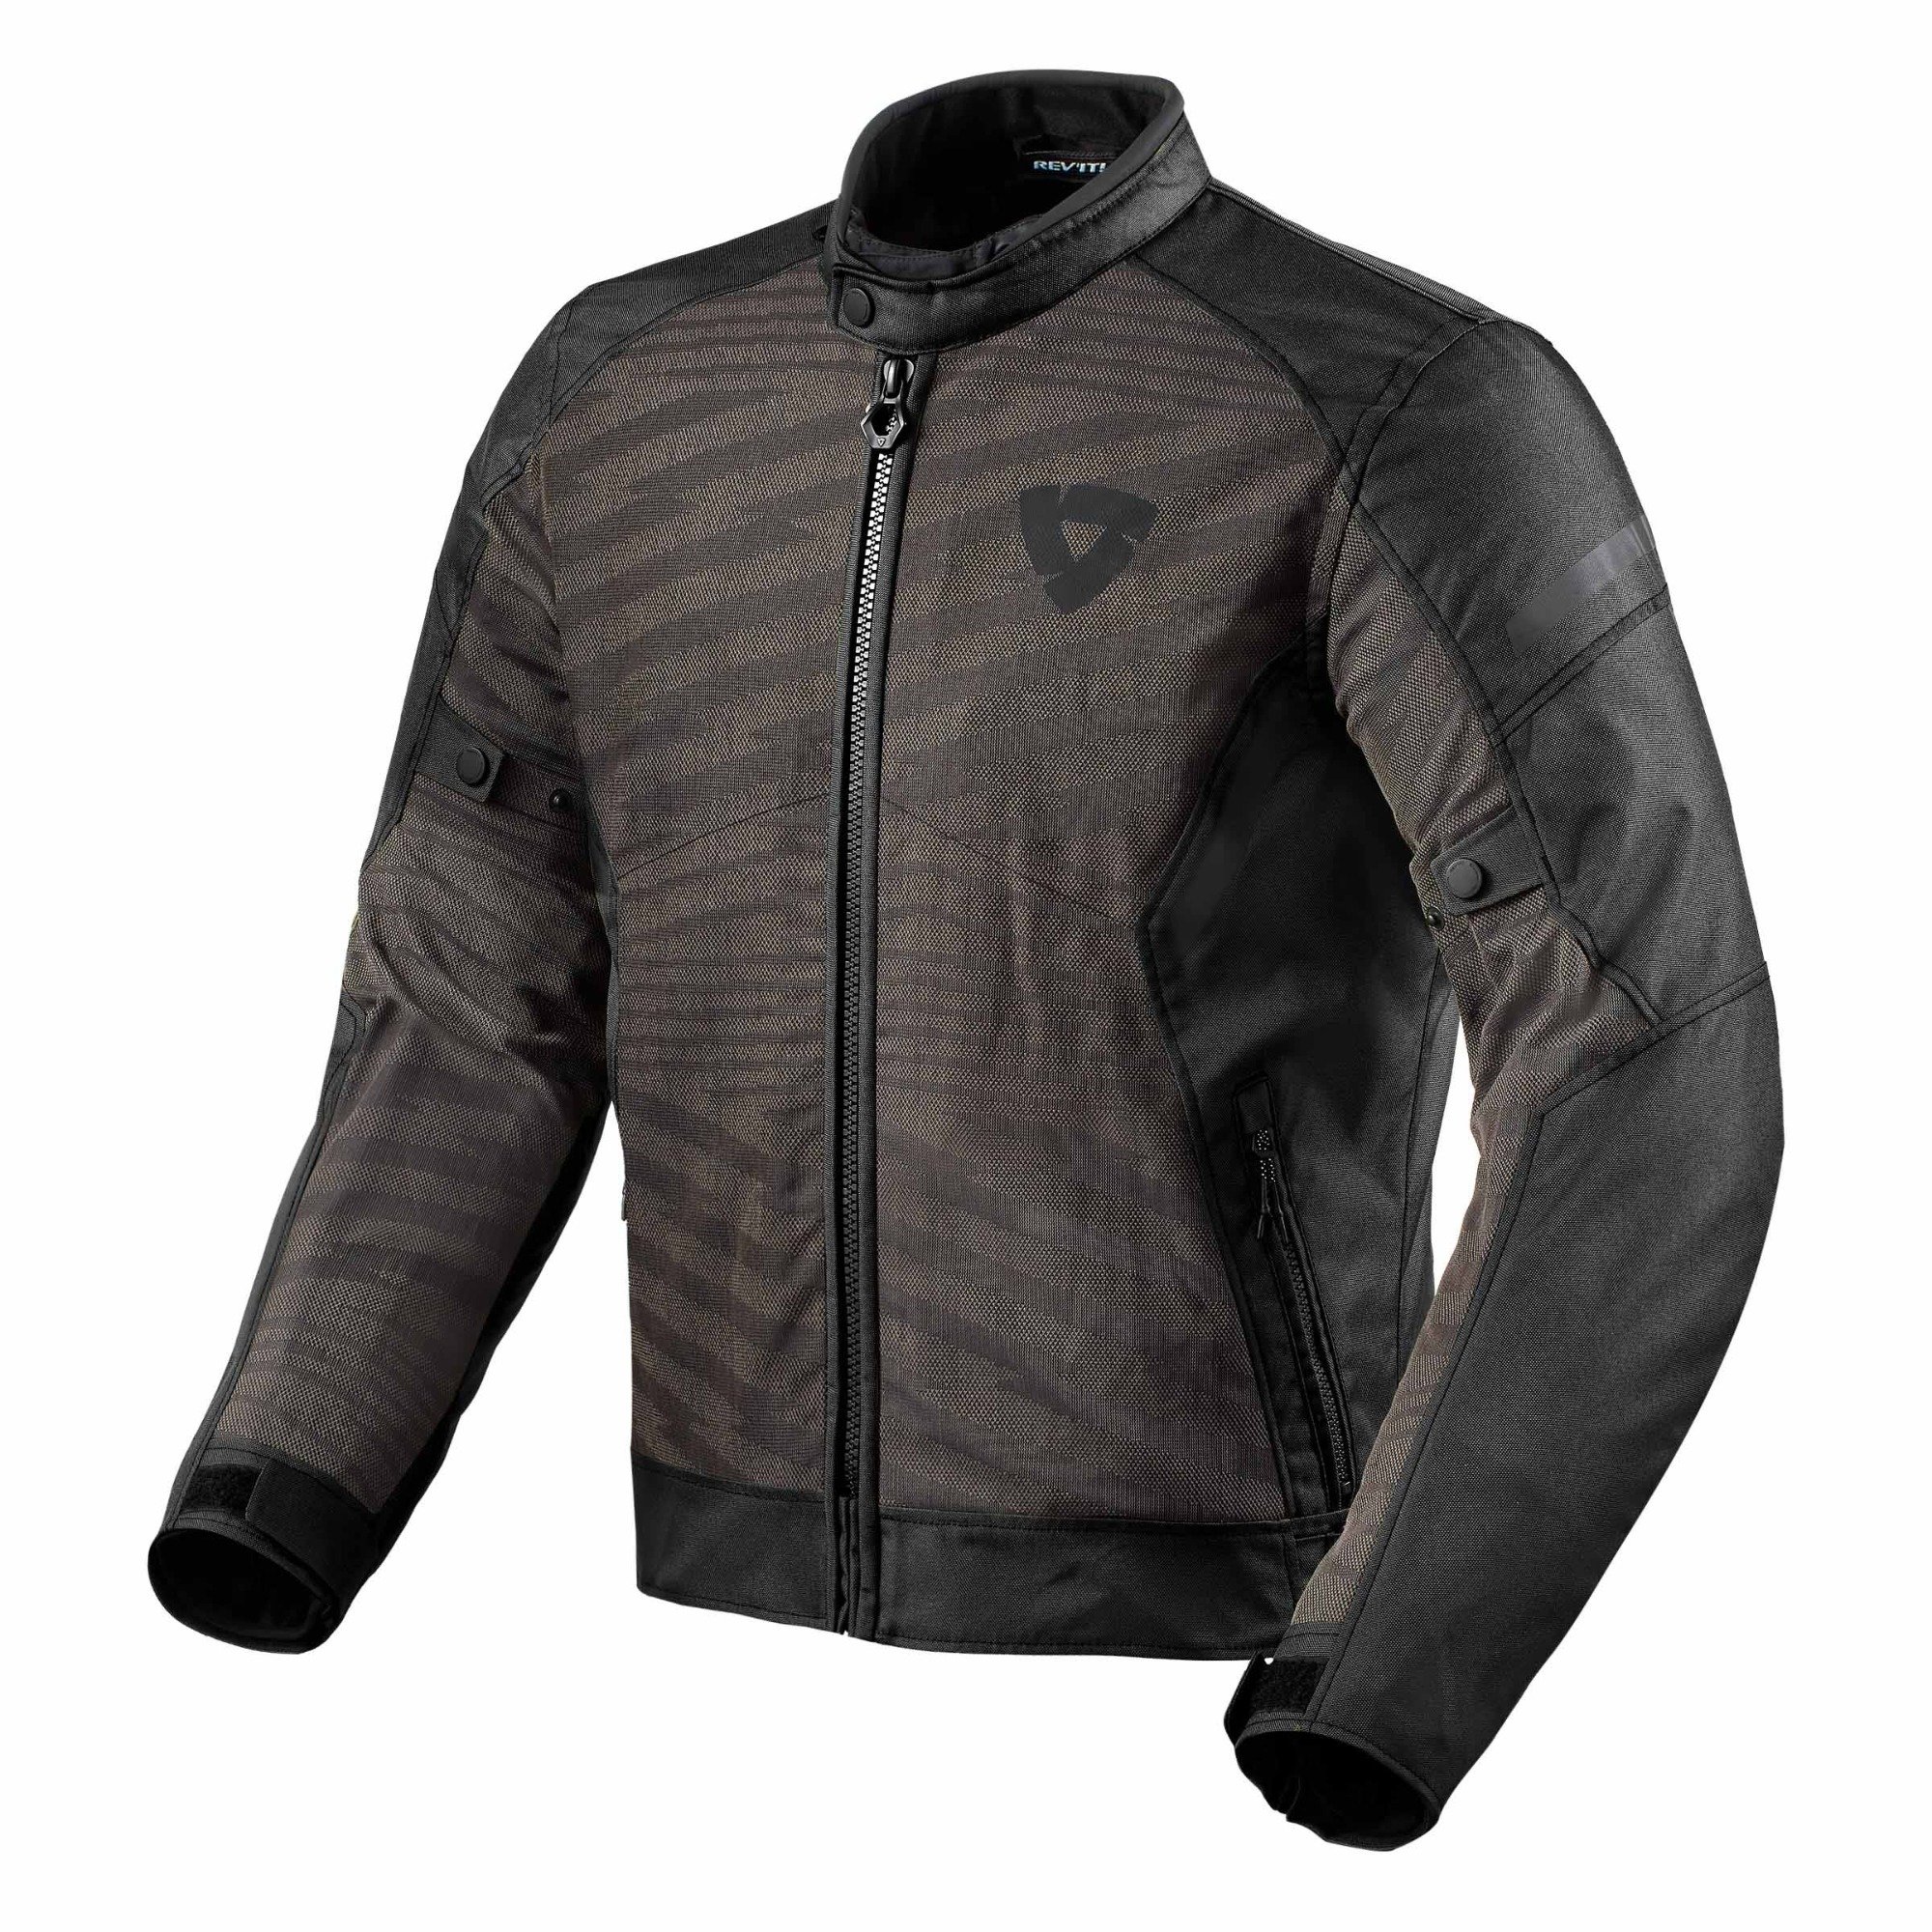 Image of REV'IT! Torque 2 H2O Jacket Black Anthracite Size M ID 8700001333870